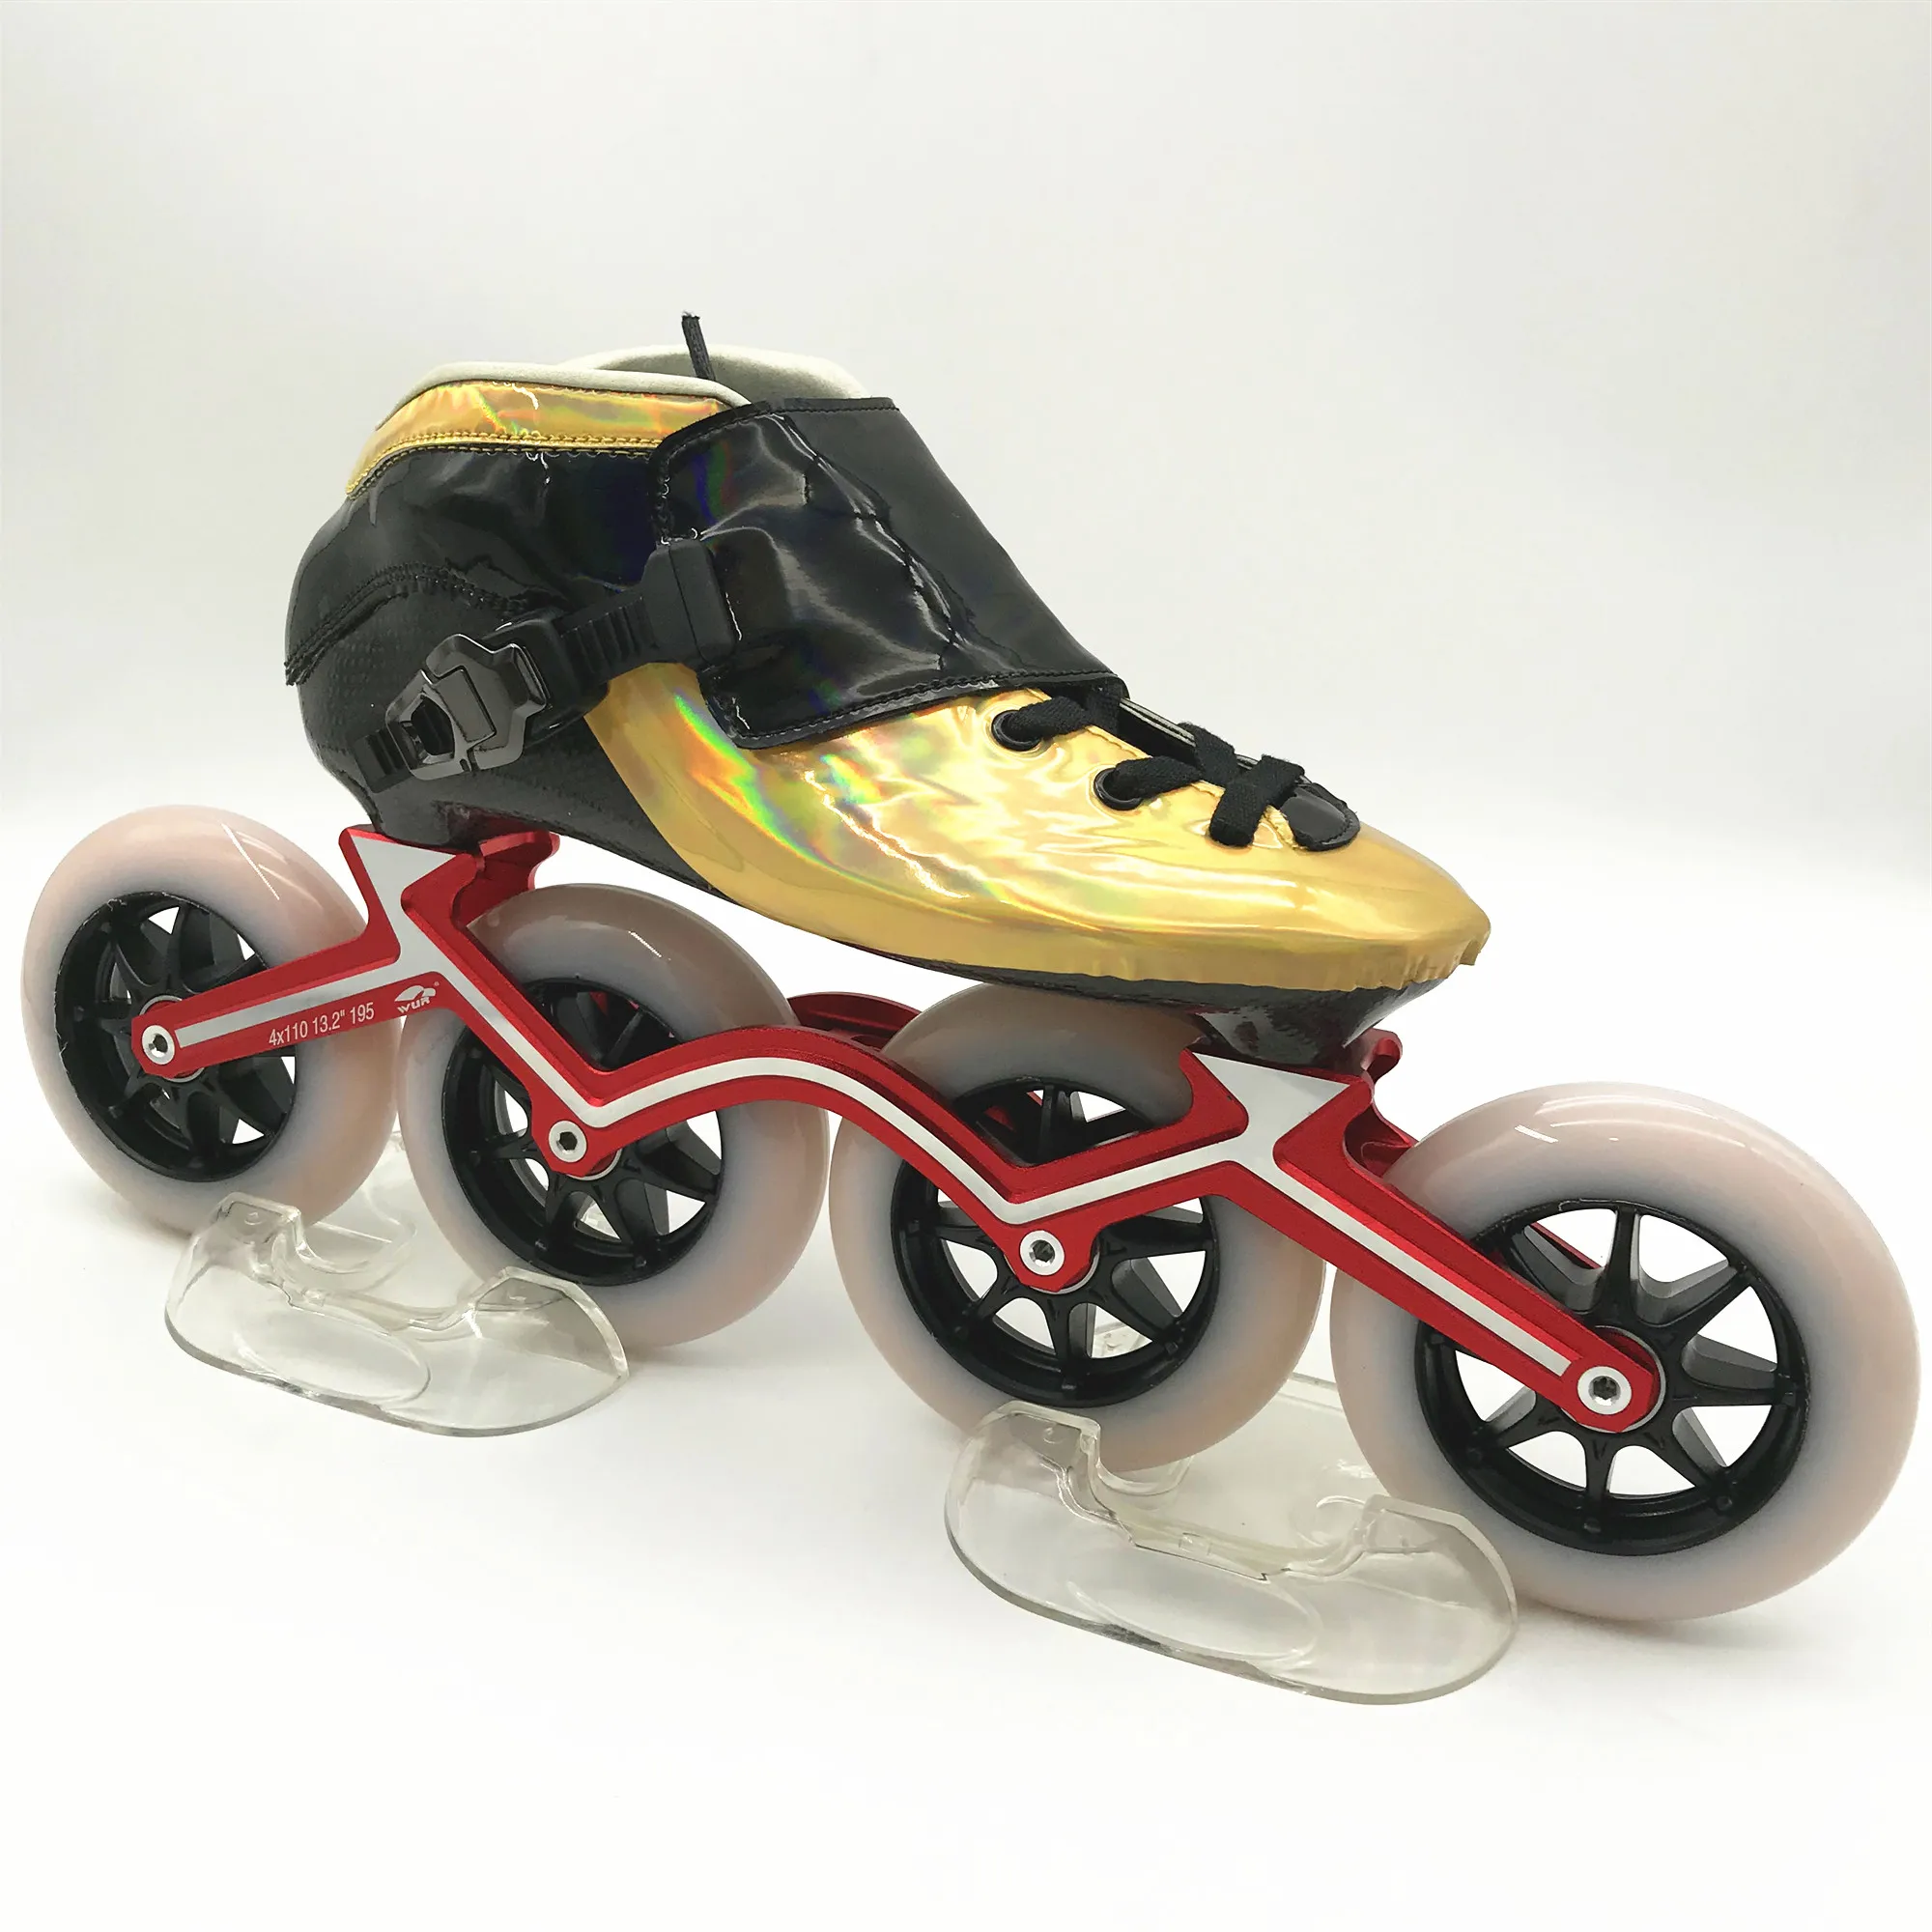 professional inline skating shoes